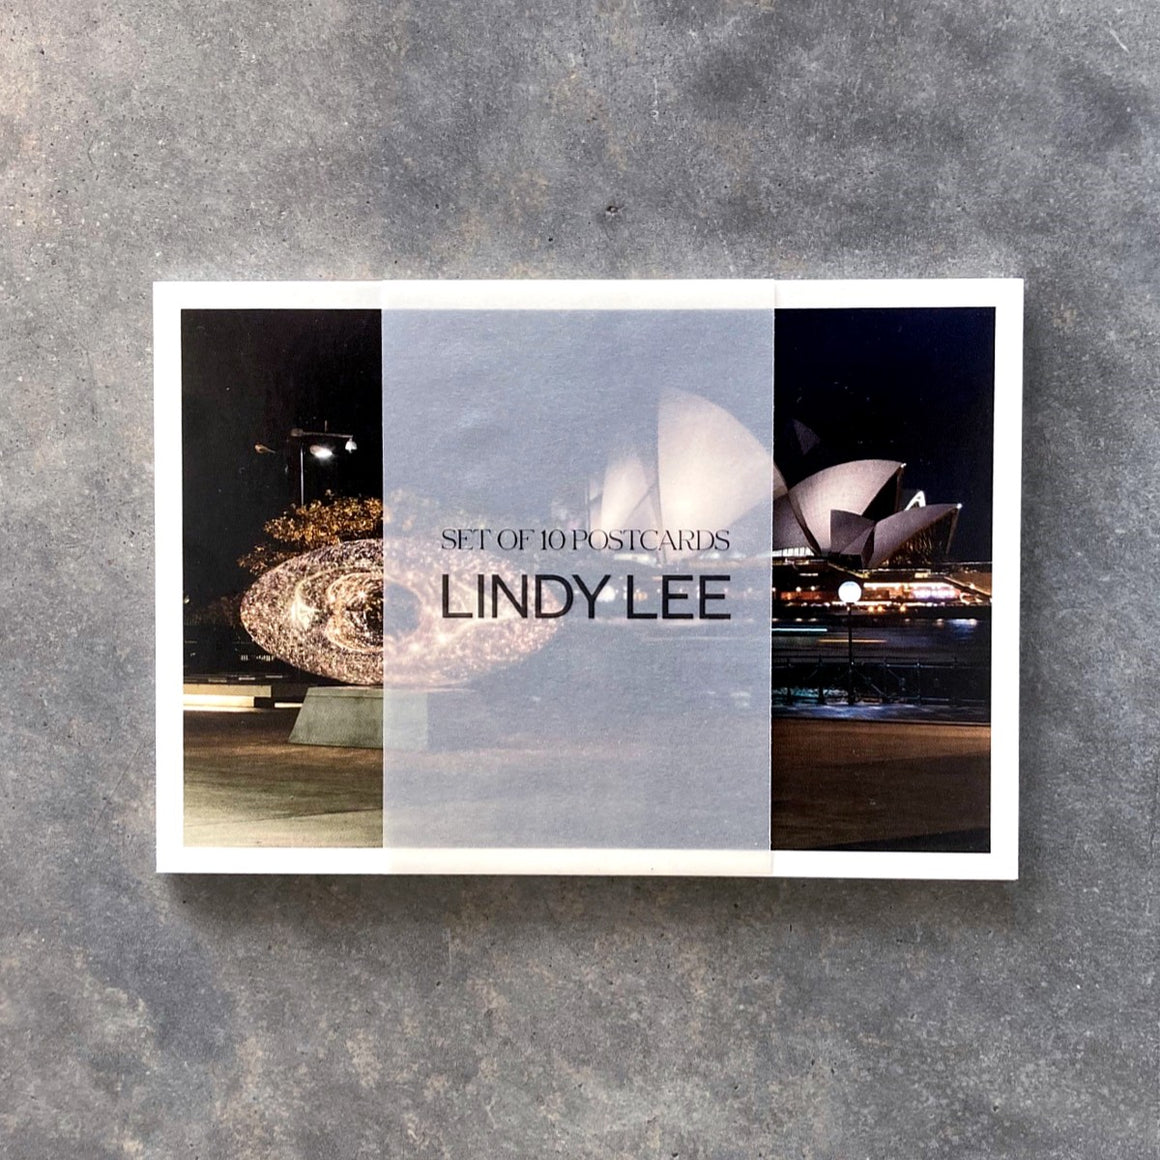 A pack of postcards featuring reproductions of Lindy Lee's artworks. The pack of 10 are held together by a semi translucent paper wrap